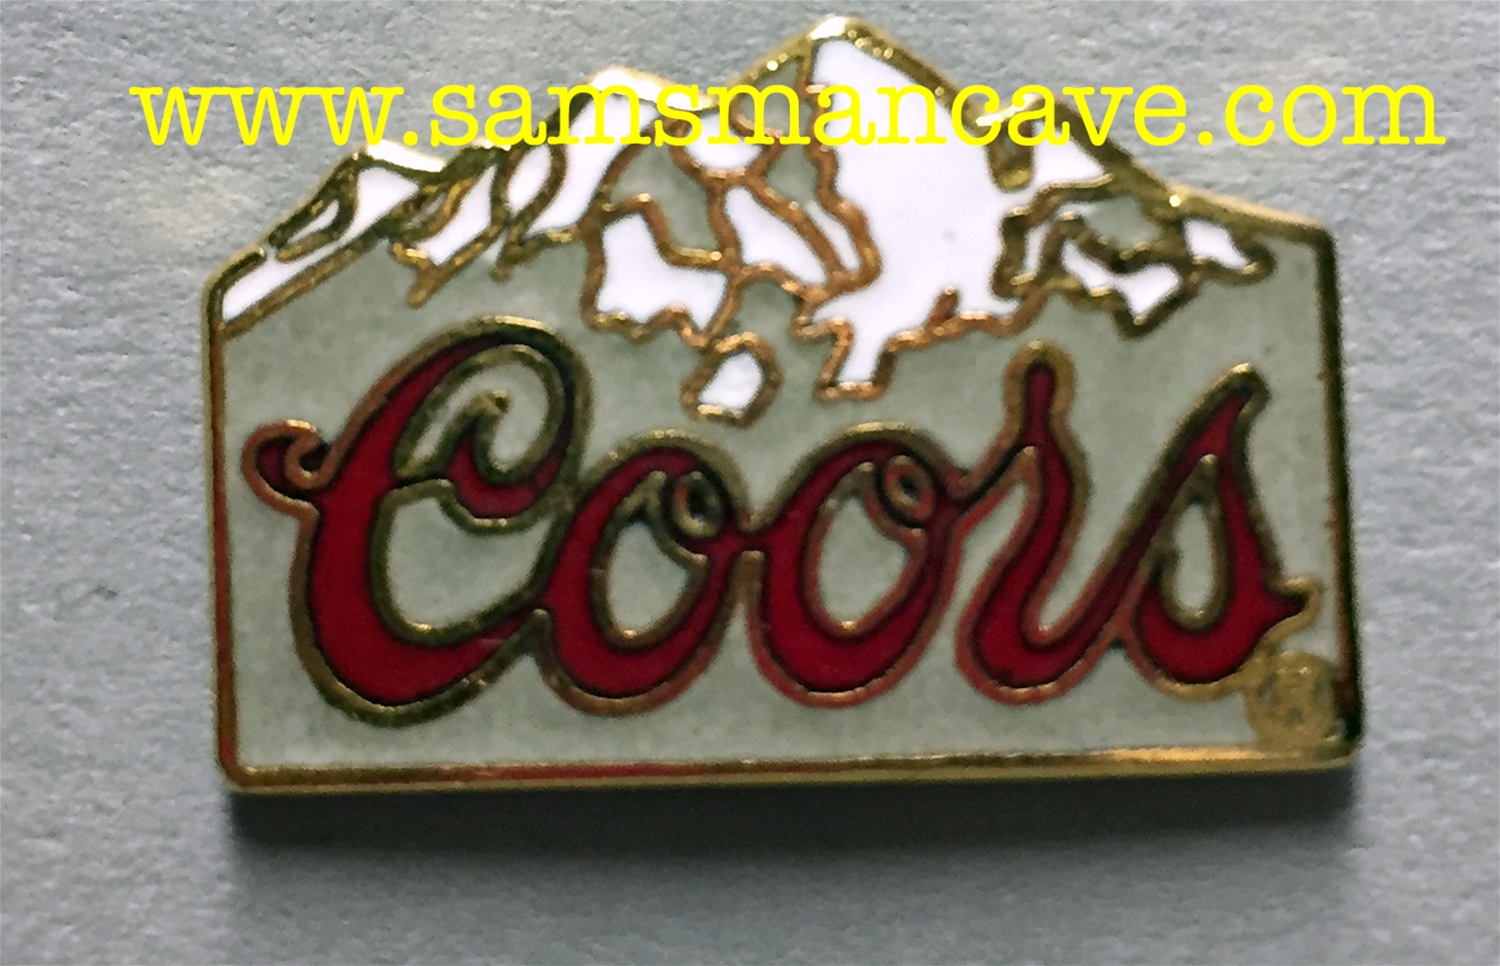 Coors Rocky Mountains Pin